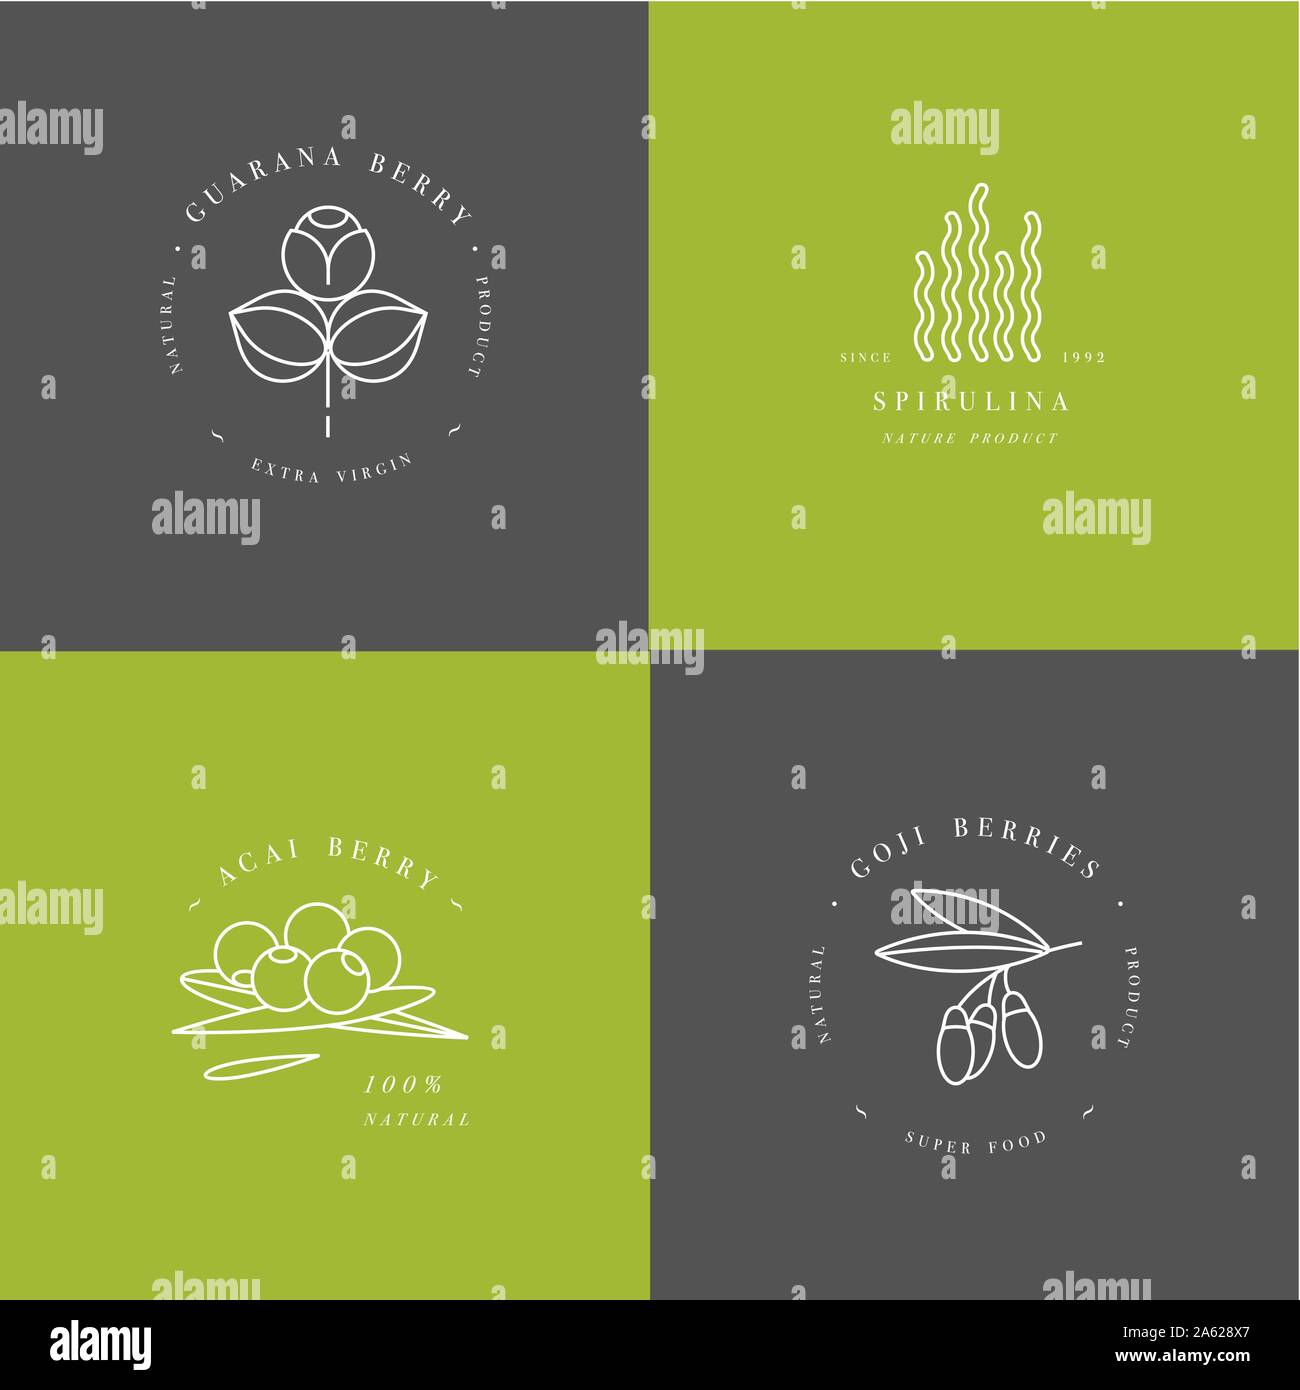 Vector set design templates and emblems - healthy eco food - camu camu, spirulina, goji berry and acai berry. Detox and weightloss supplements. Stock Vector